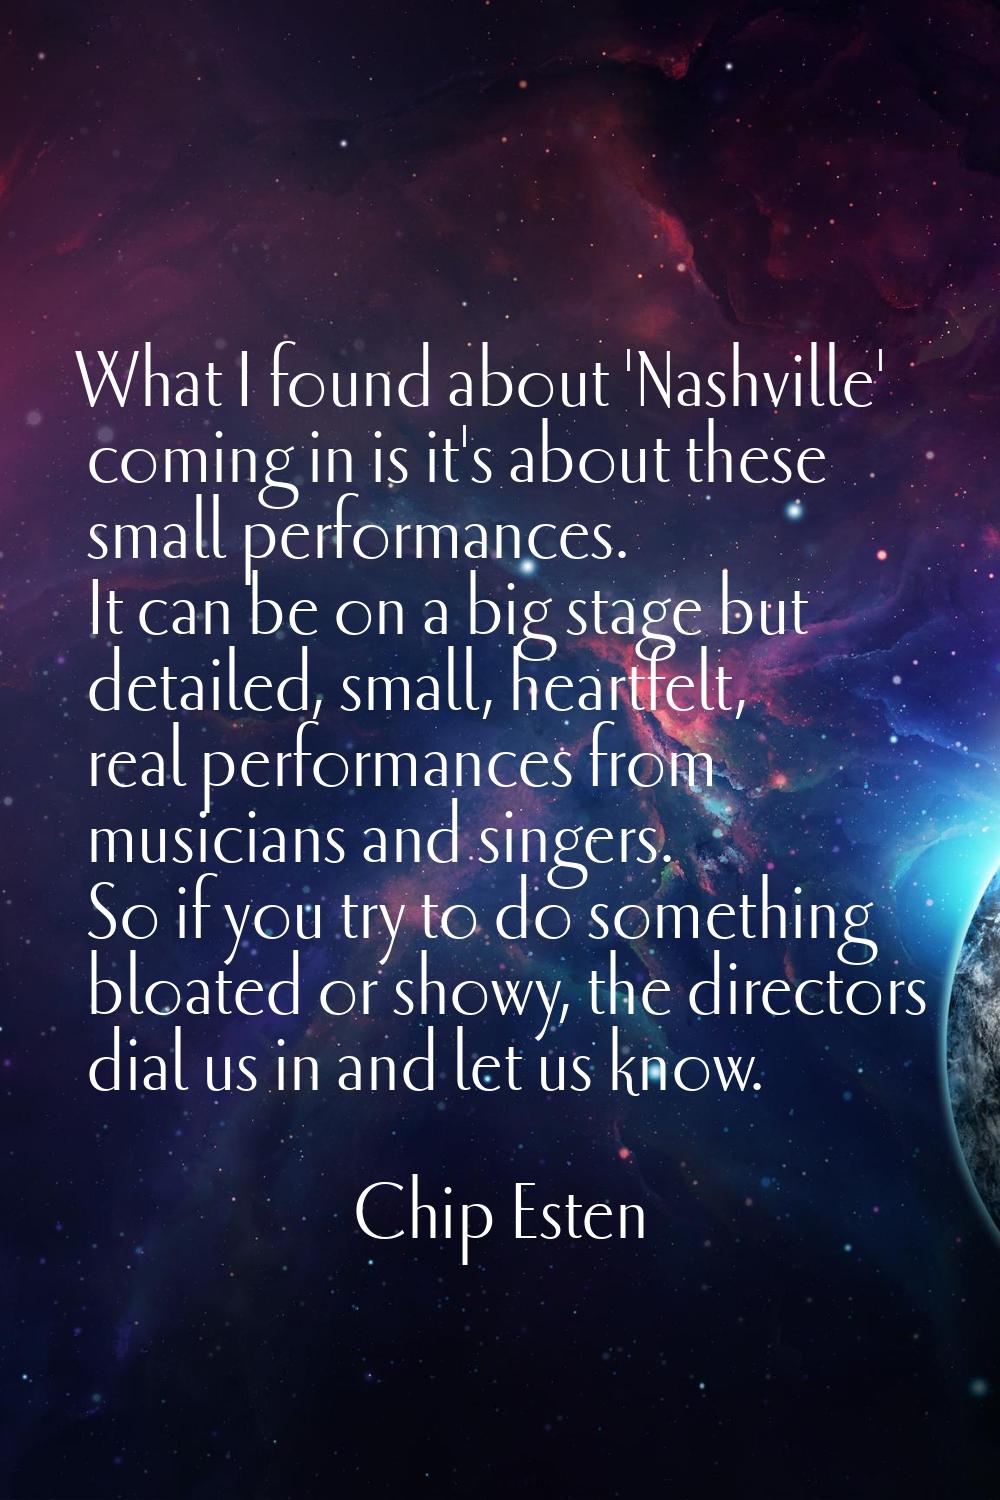 What I found about 'Nashville' coming in is it's about these small performances. It can be on a big